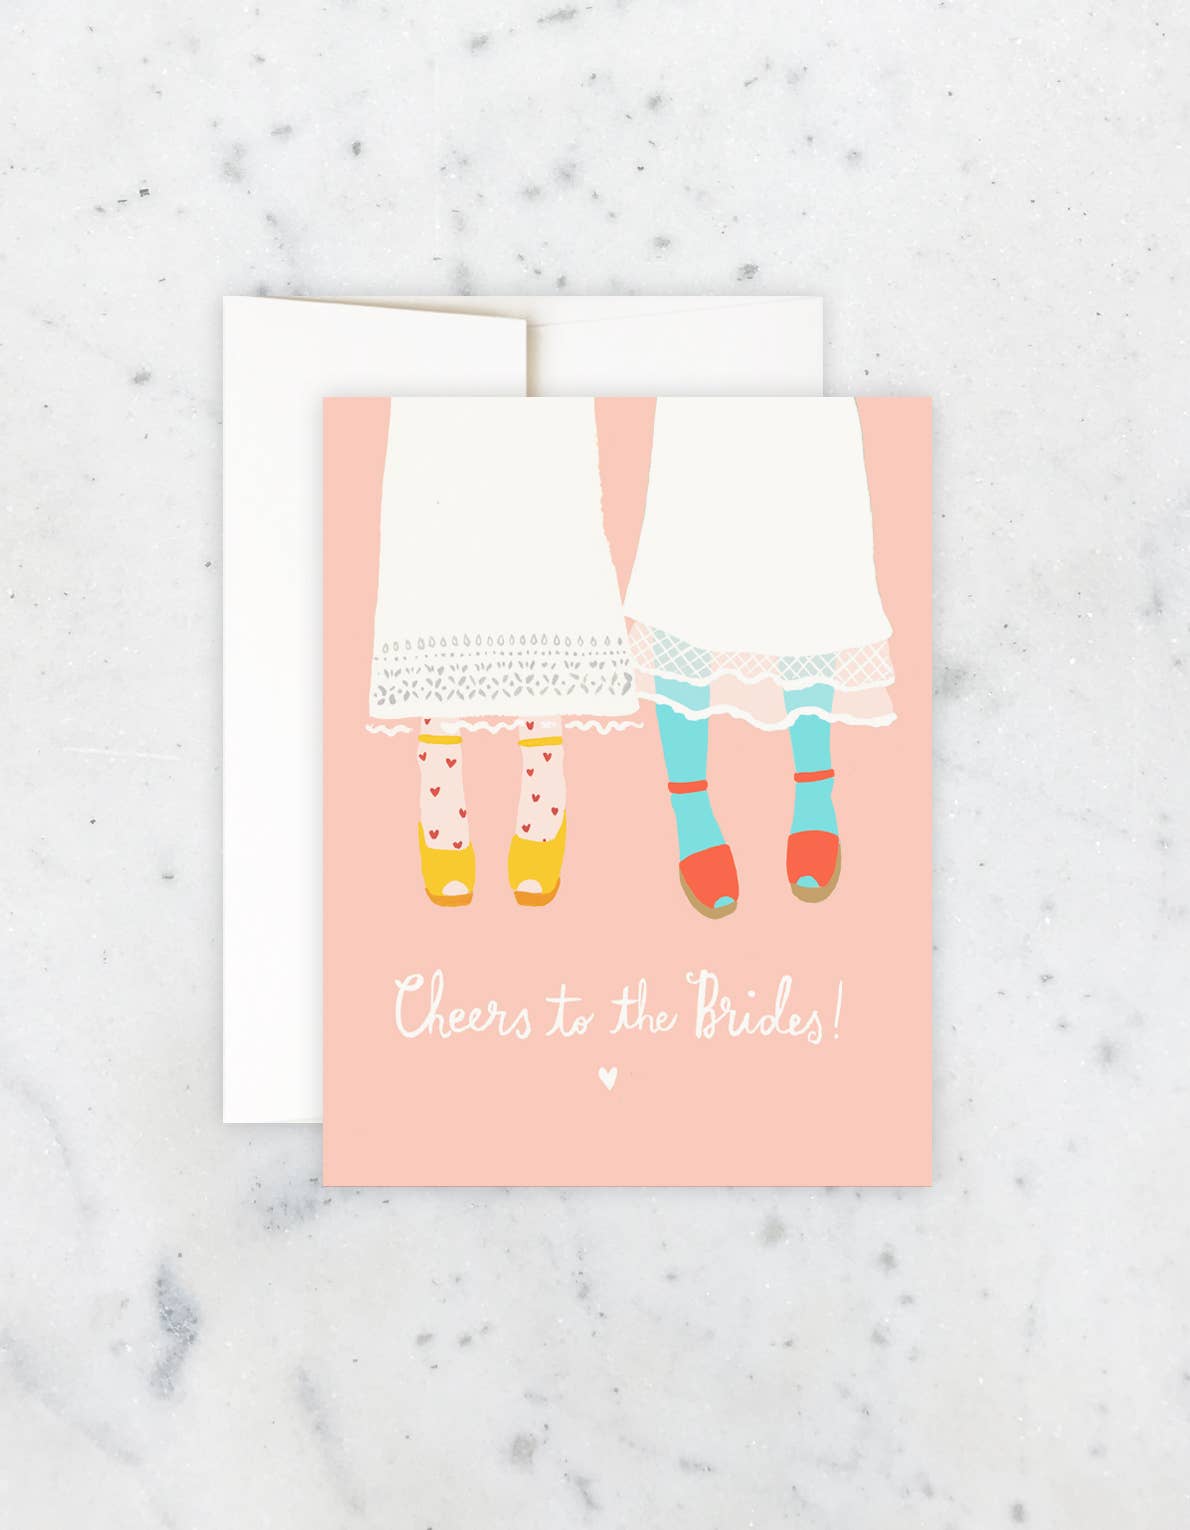 "Cheers To The Brides" Card